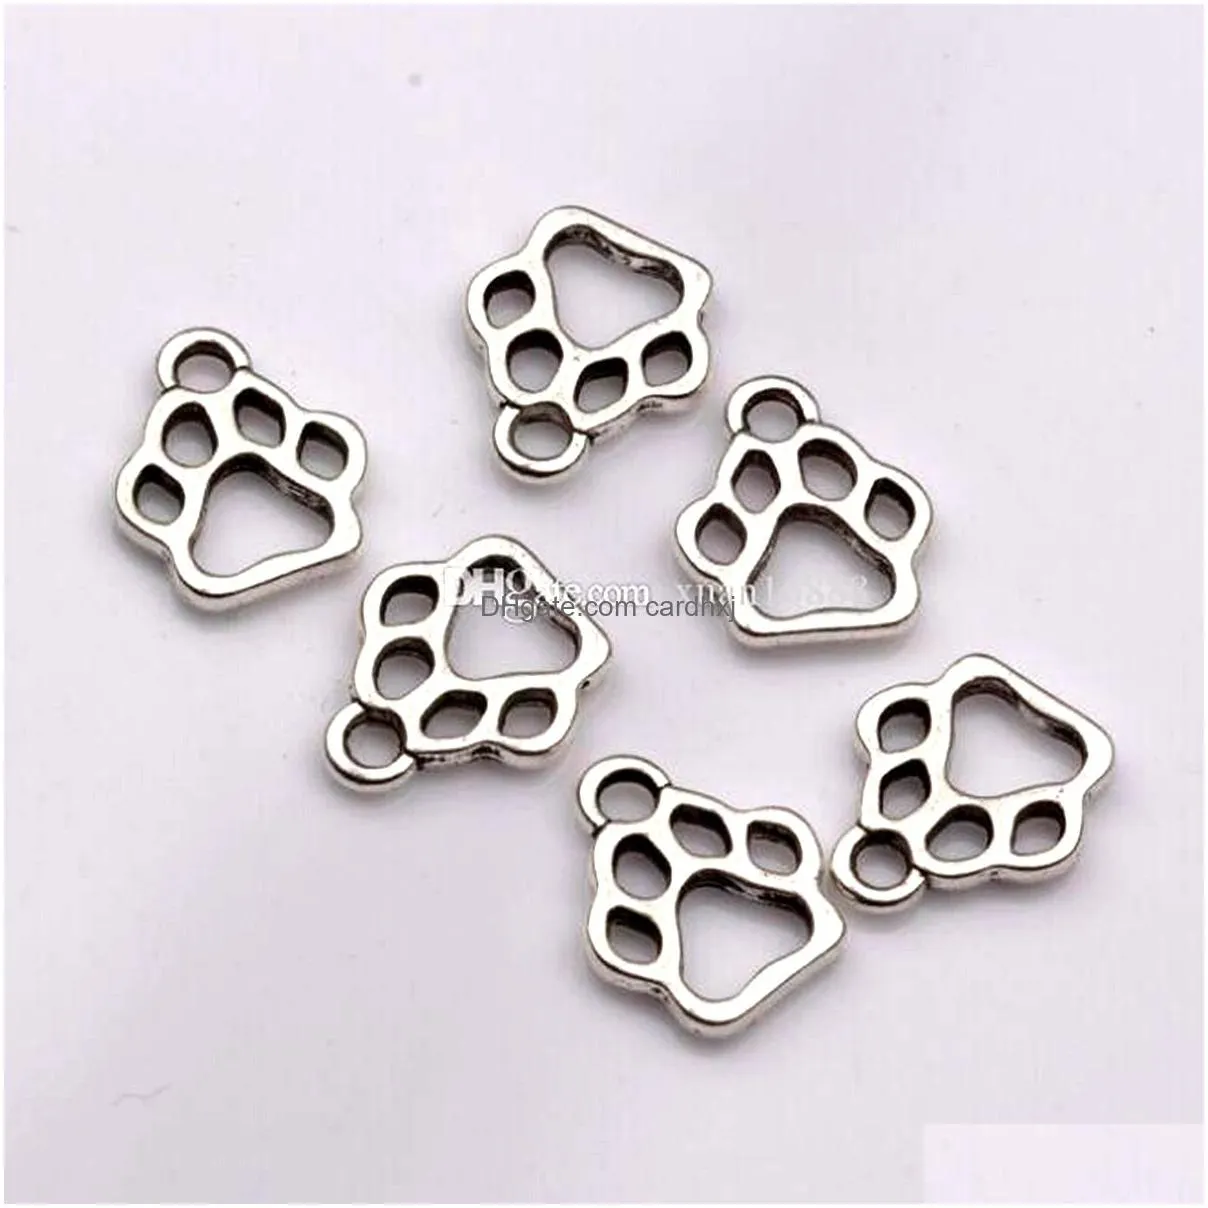 Charms 500Pcs Alloy Hollow Dog Paw Charm Pendant For Jewelry Making Bracelet Necklace Diy Accessories 11X1M Antique Sier Jewelry Jewel Dhho8